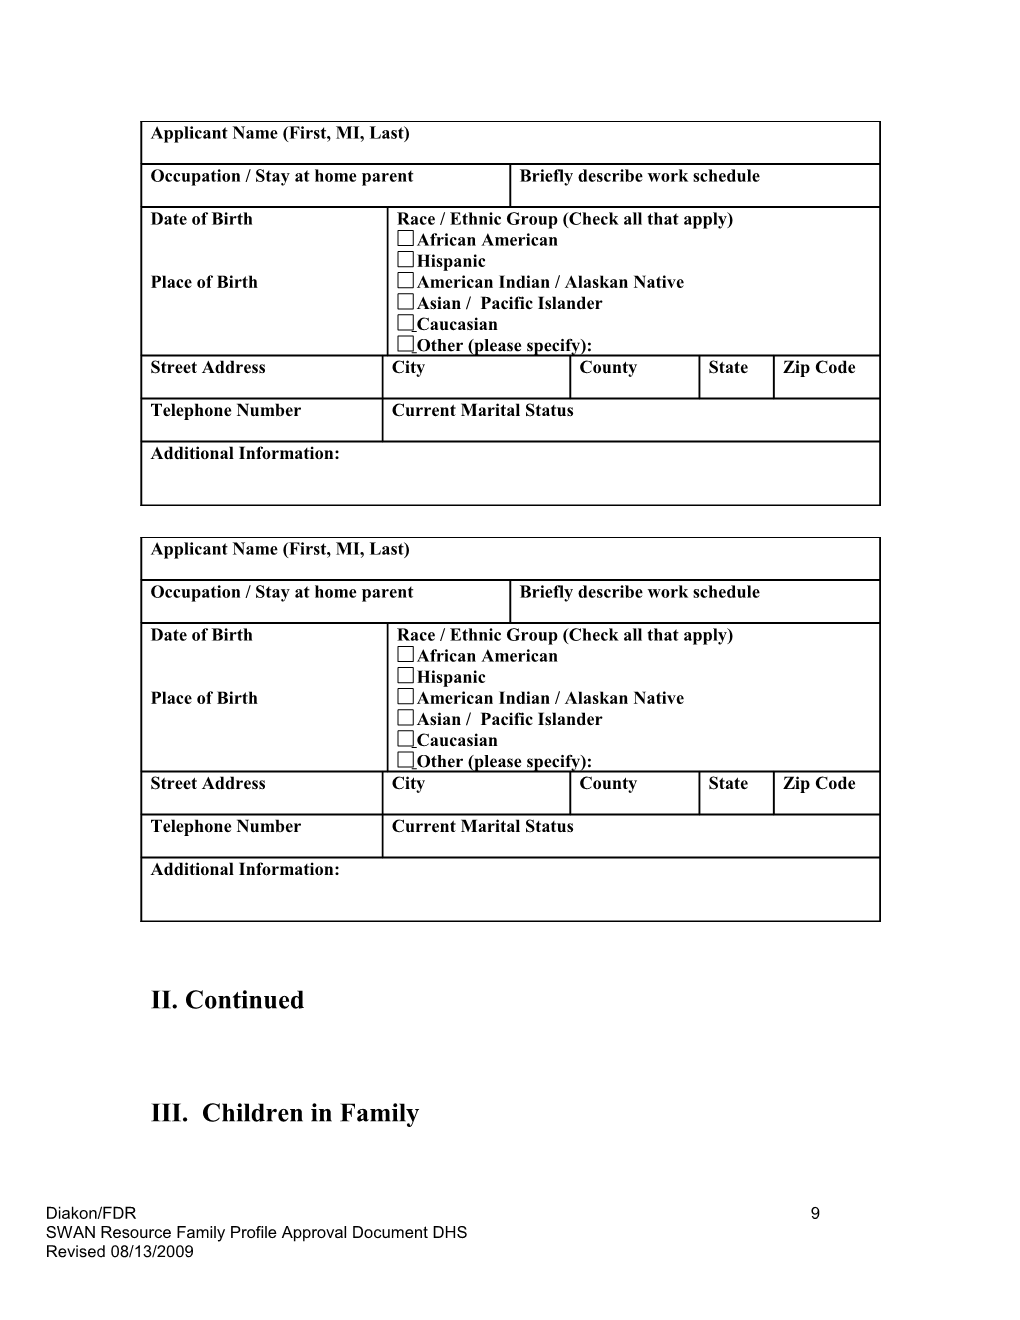 Resource Family Profile Final Approval Document (DHS)